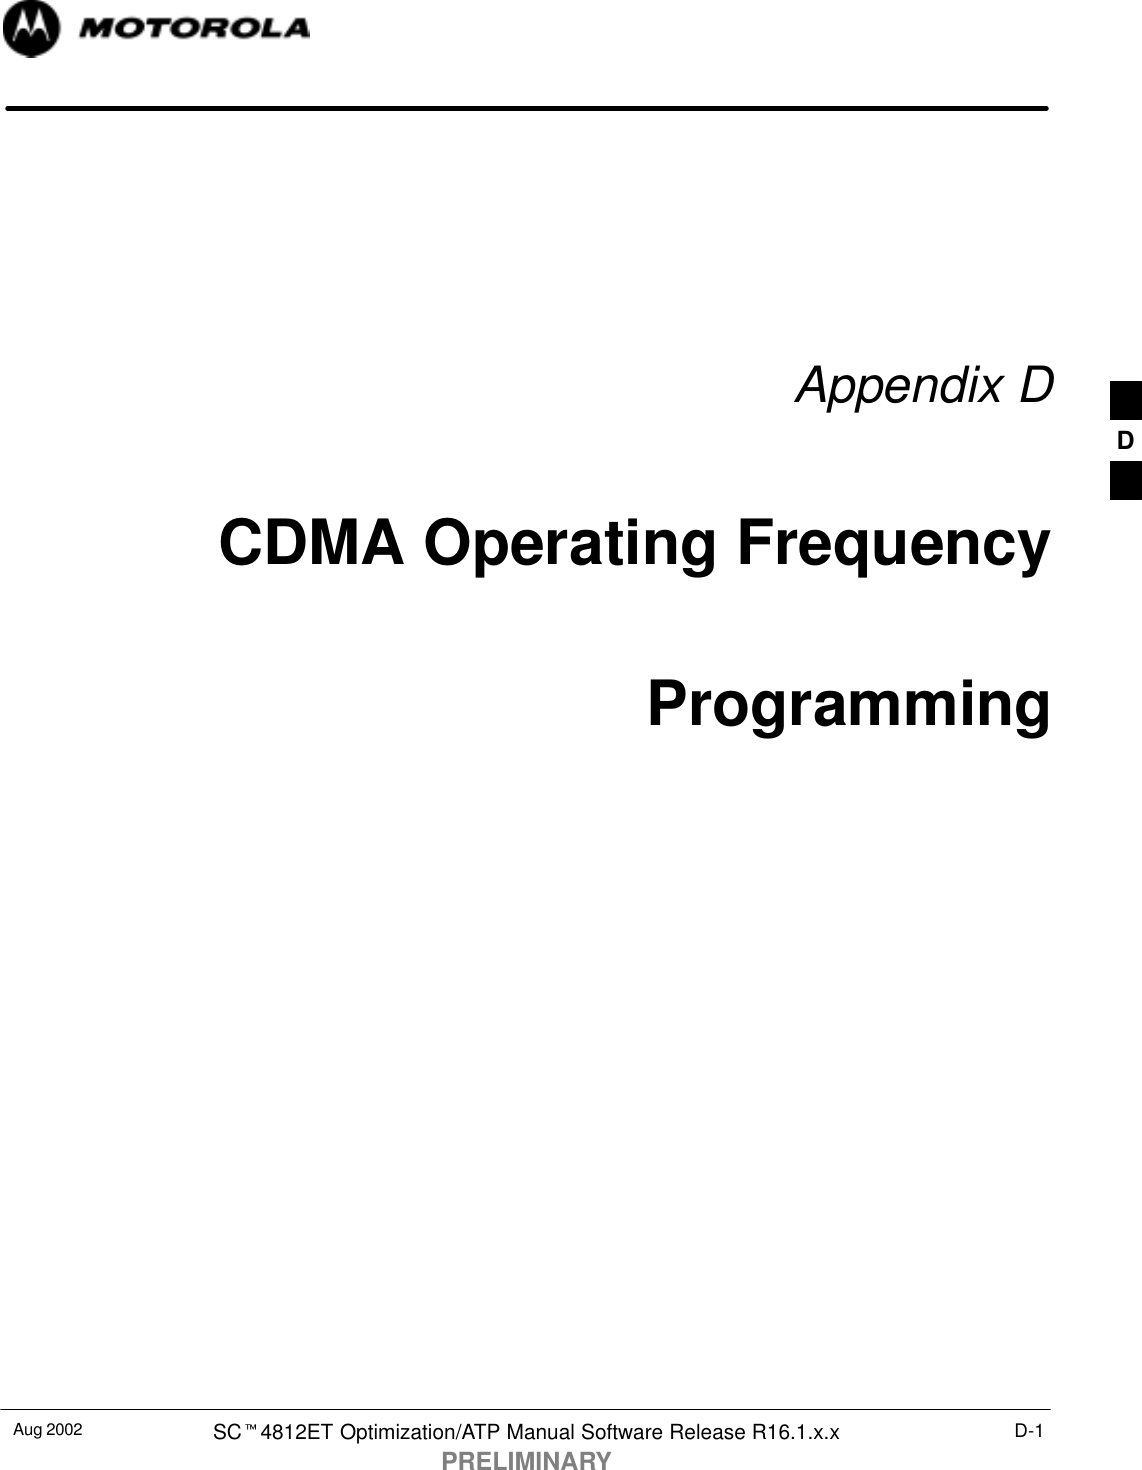 Aug 2002 SCt4812ET Optimization/ATP Manual Software Release R16.1.x.xPRELIMINARYD-1Appendix DCDMA Operating FrequencyProgrammingD